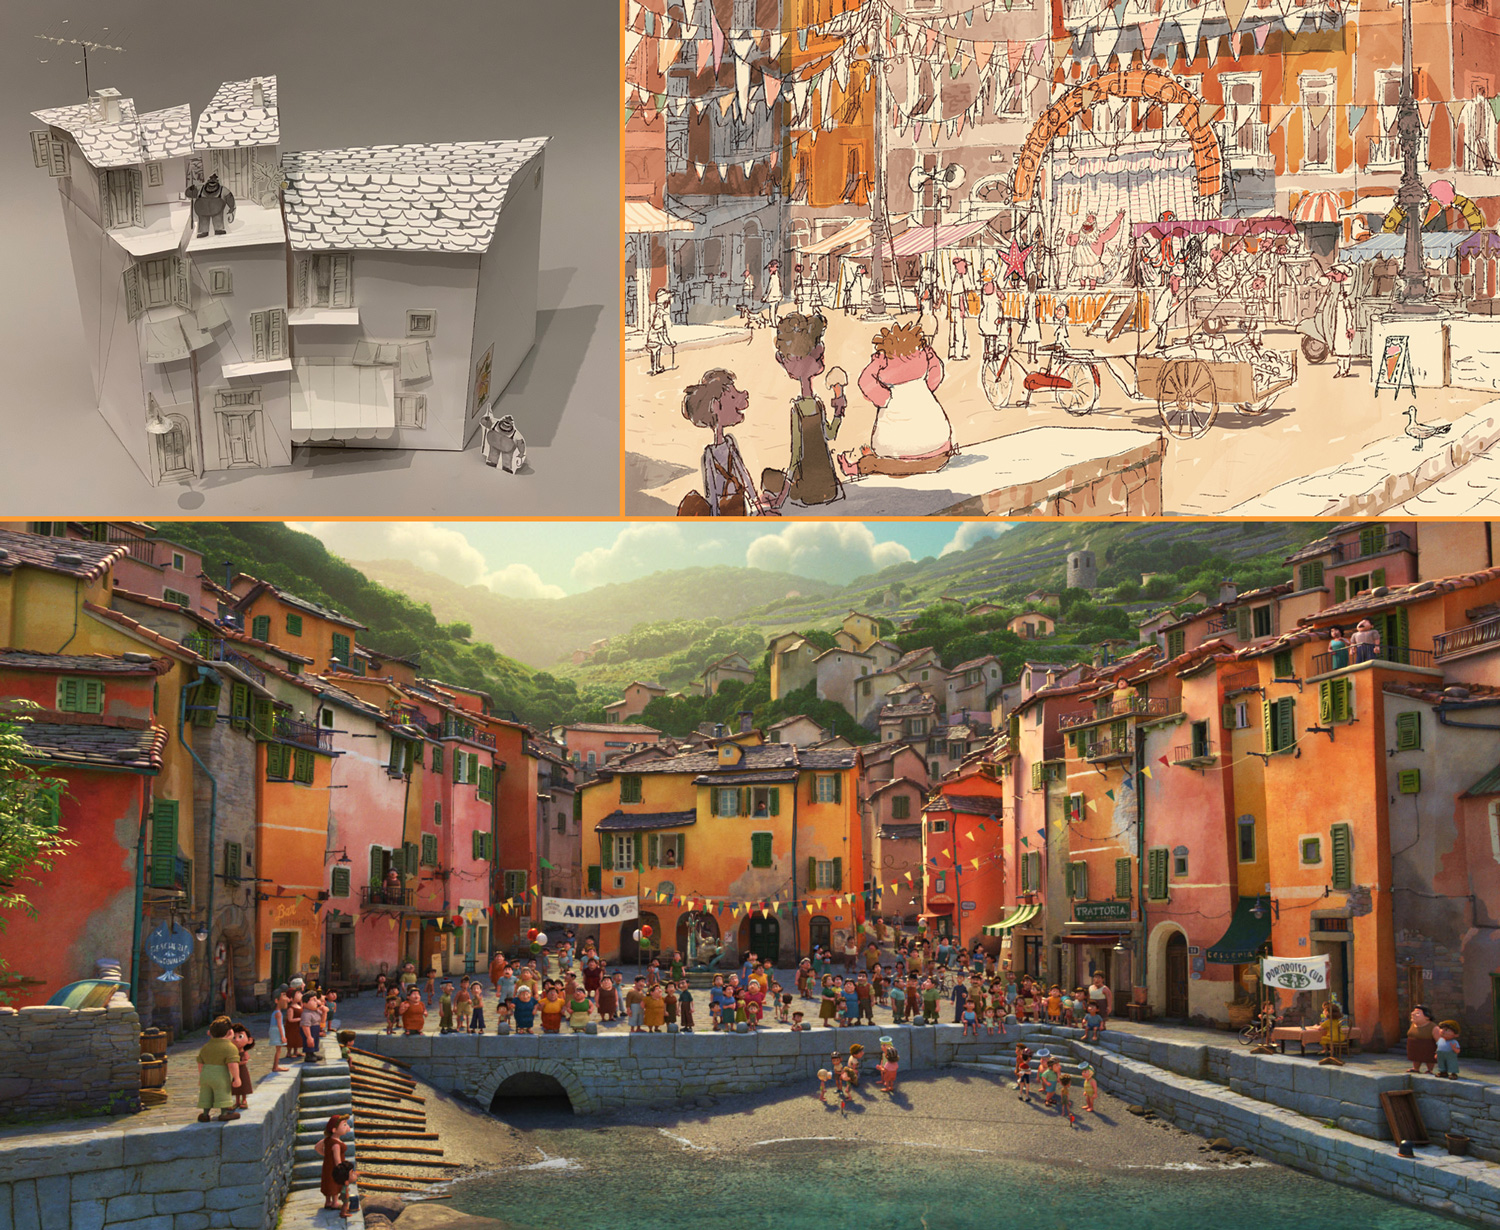 A 3D model of a scene from the movie Luca, an illustration, and a still from the finished animation.